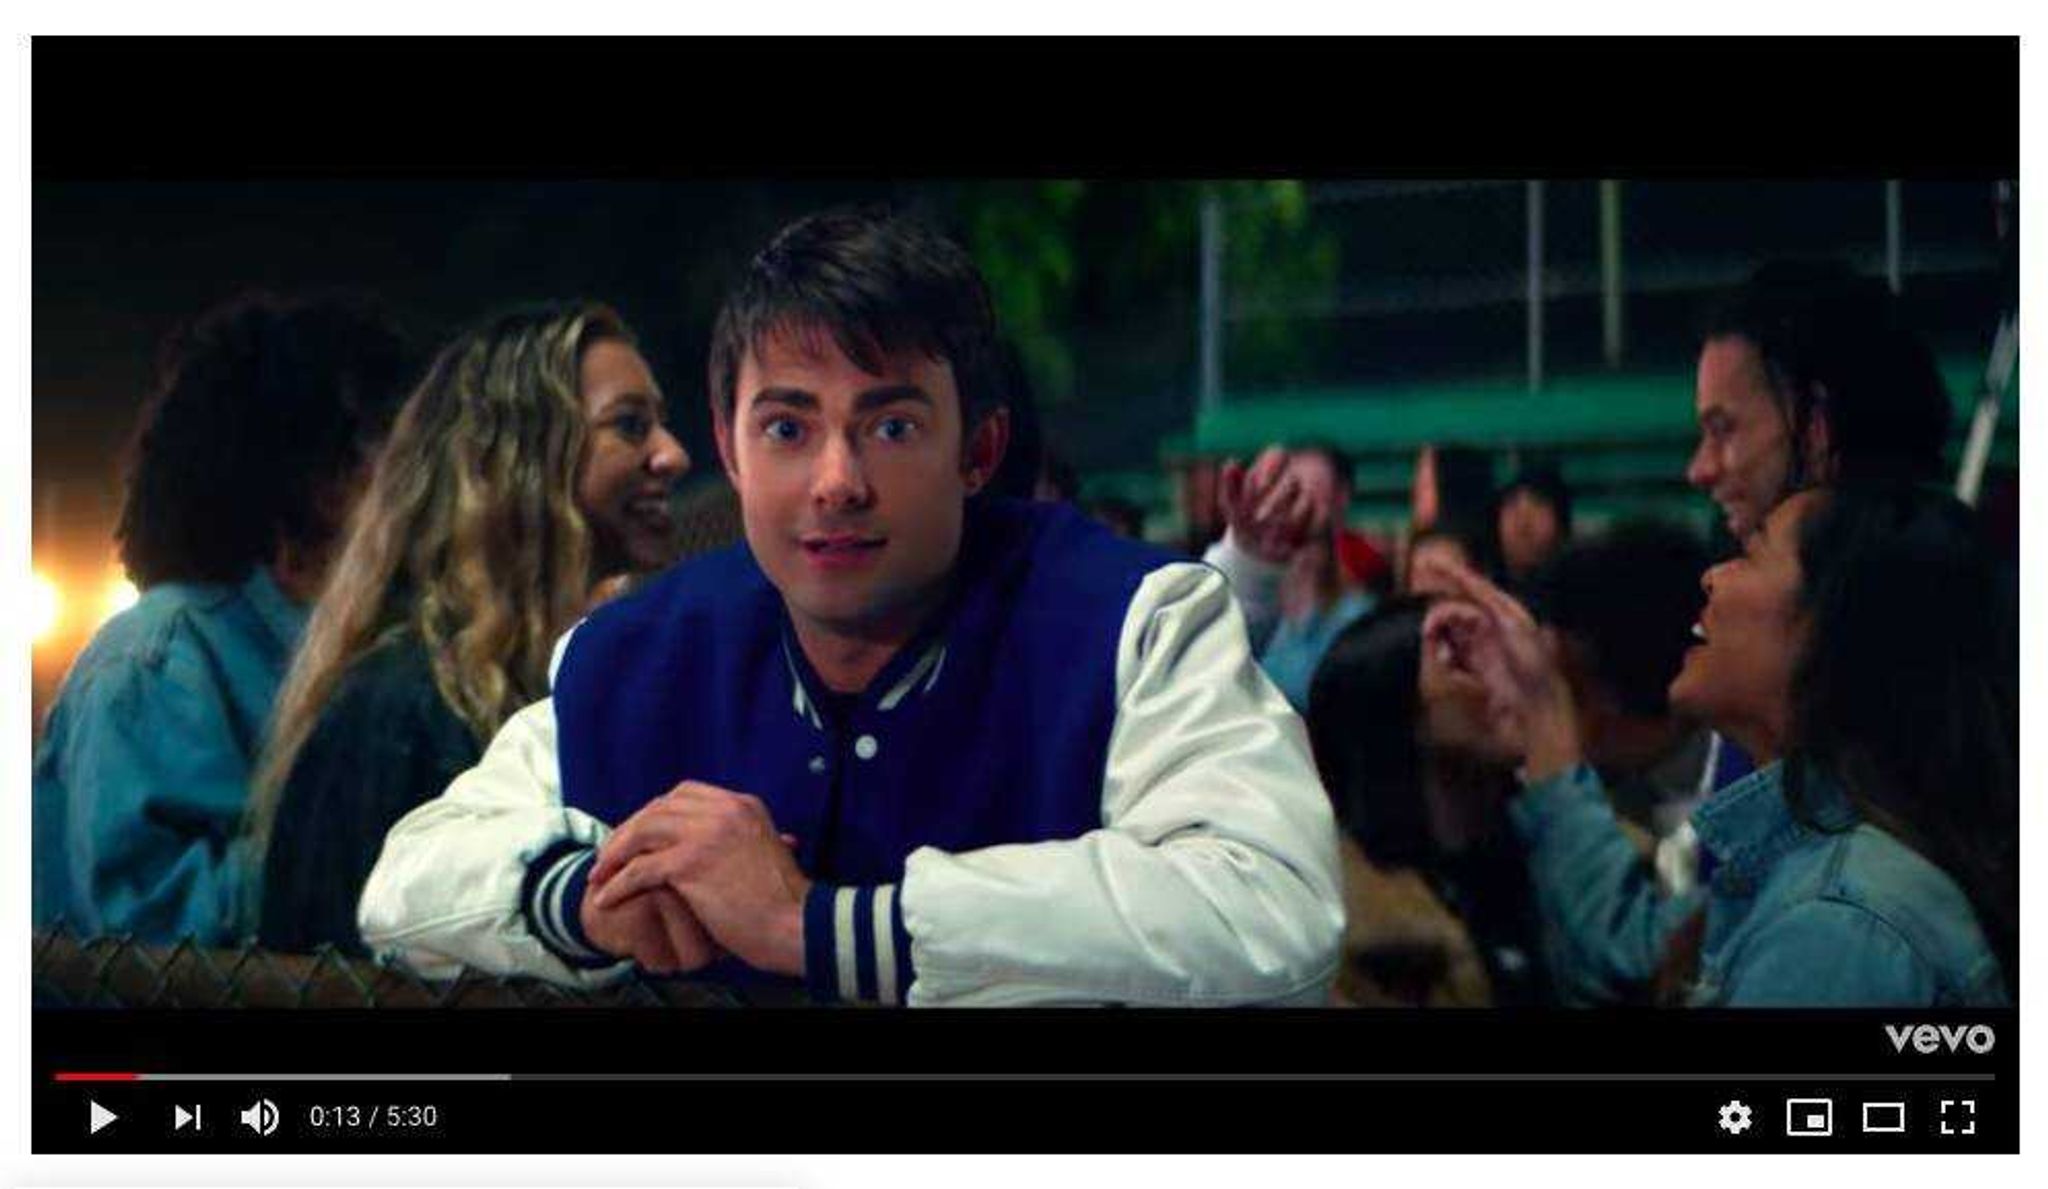 Jonathan Bennett, who played Aaron Samuels in "Mean Girls" in Ariana Grande's "thank u, next" music video.